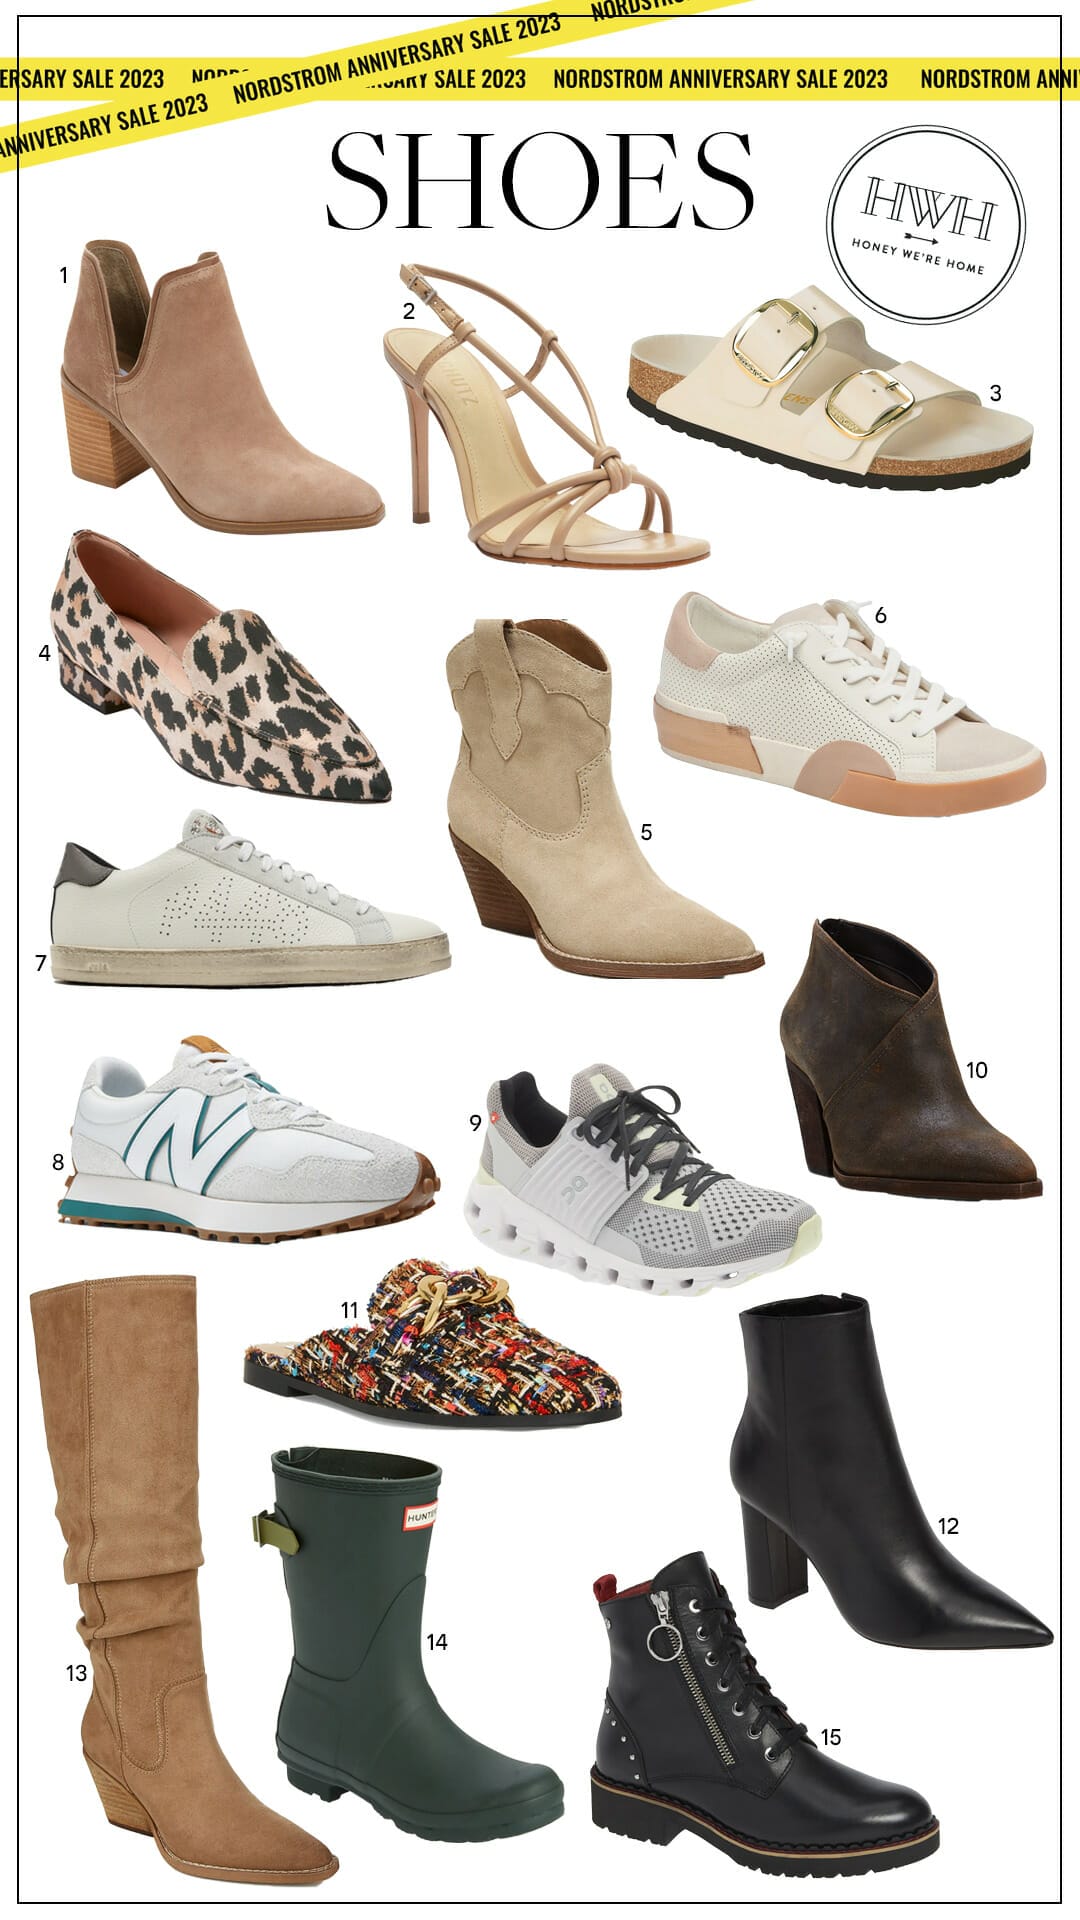 Nordstrom Anniversary Sale 2023 | Best Shoes, Tops, Bottoms, Coats, Dresses & Intimates